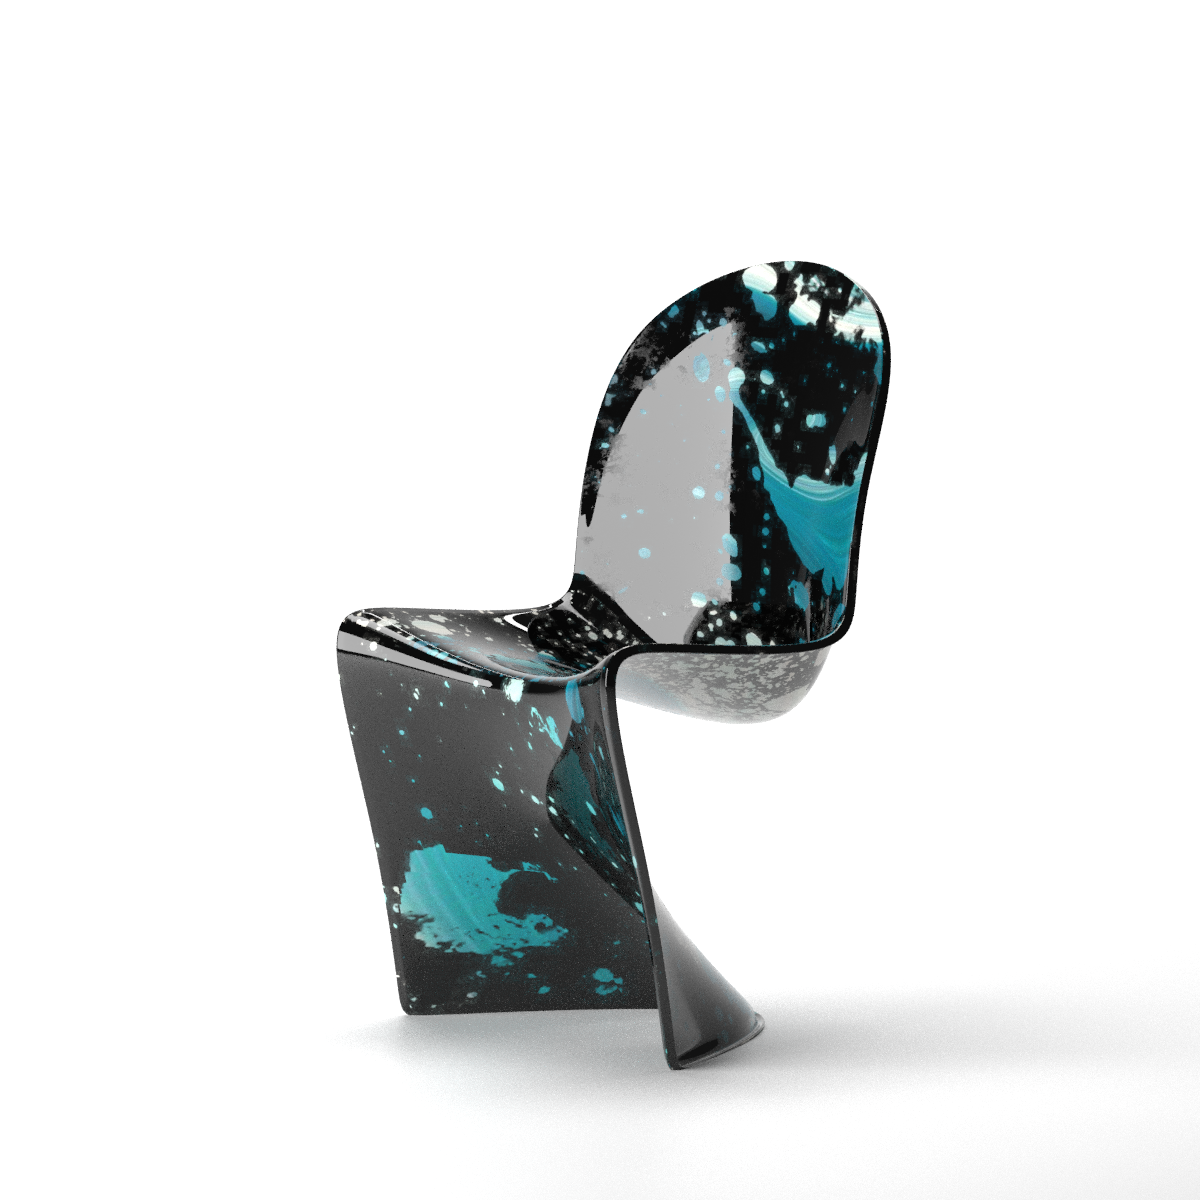 Cosmic chair rendition image